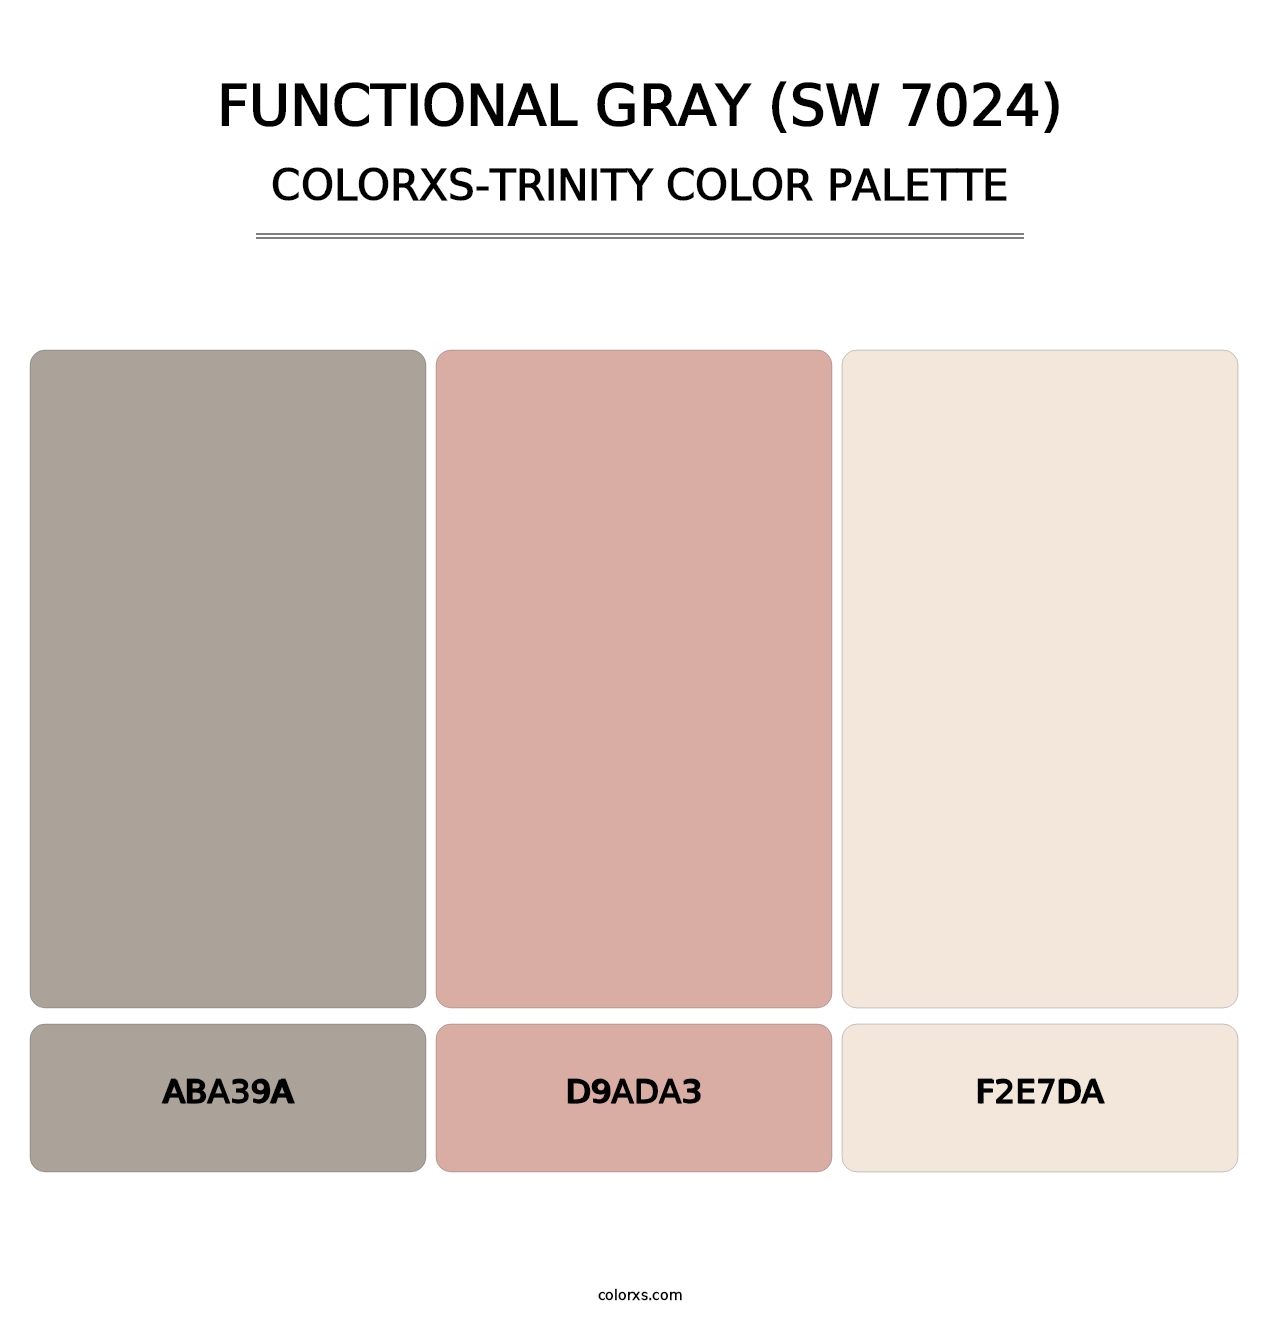 Functional Gray (SW 7024) - Colorxs Trinity Palette